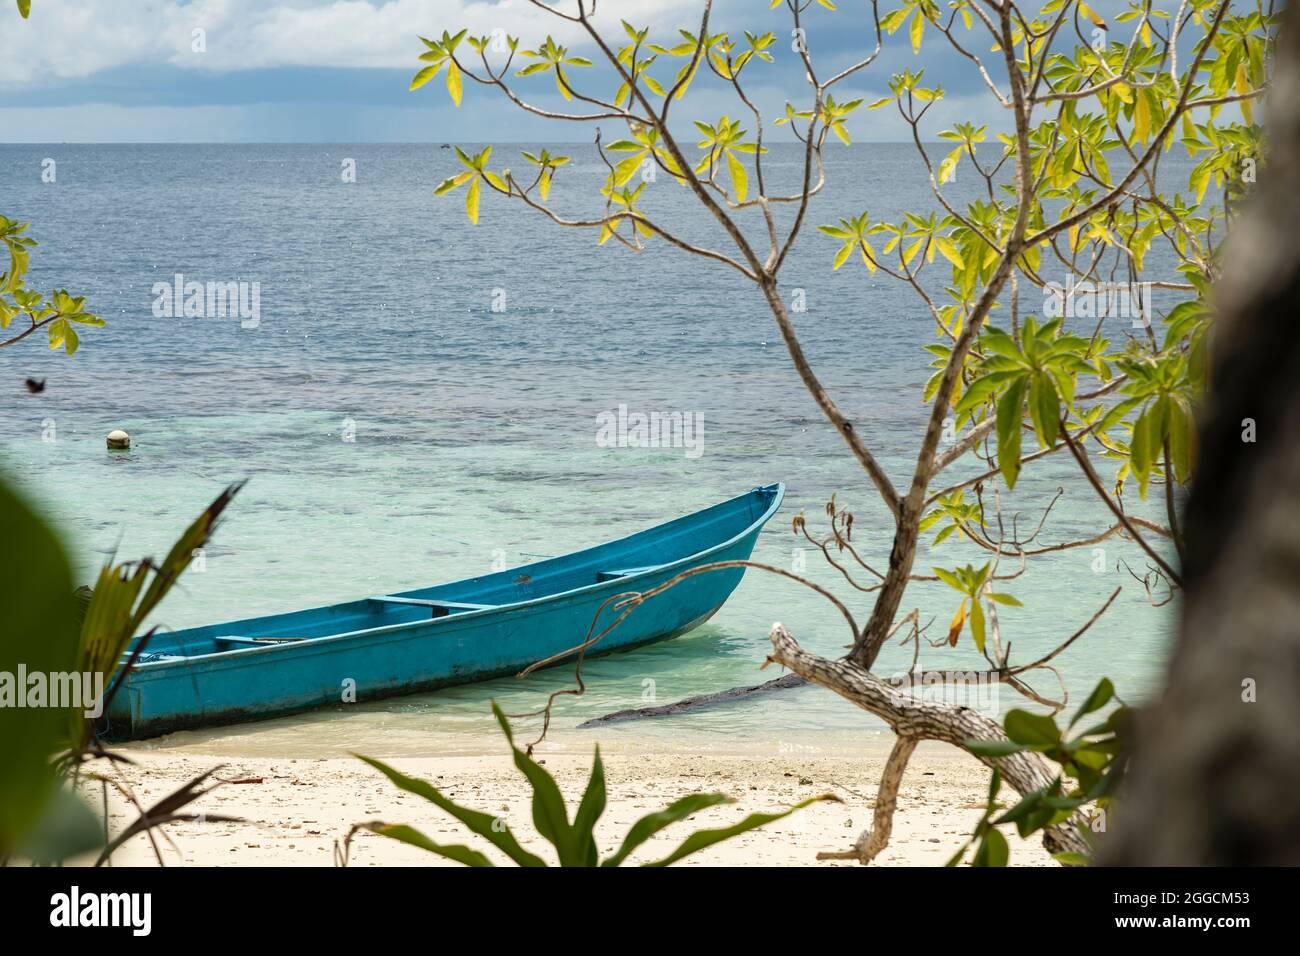 A blue painted wooden motor boat moored in front of a tropical beach on Gam Island, Raja Ampat, Indonesia Stock Photo